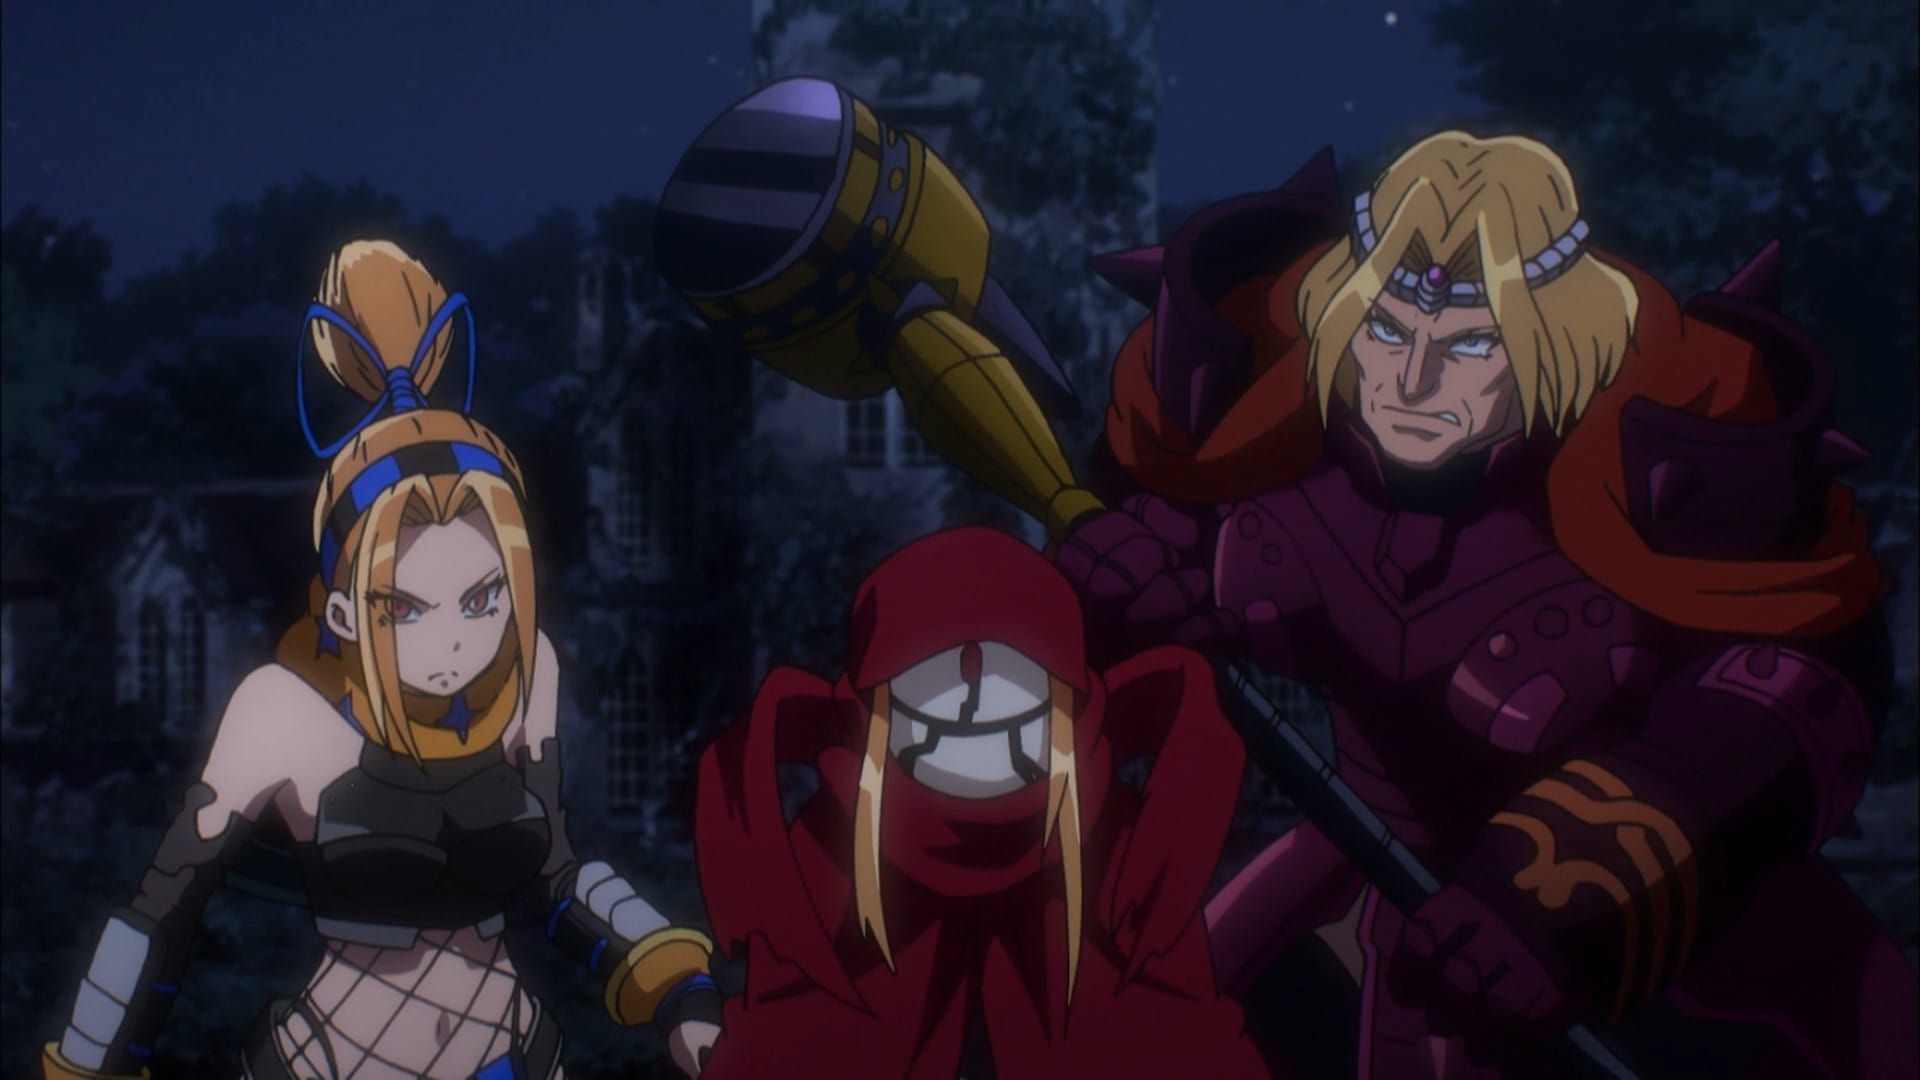 Watch Overlord season 2 episode 2 streaming online